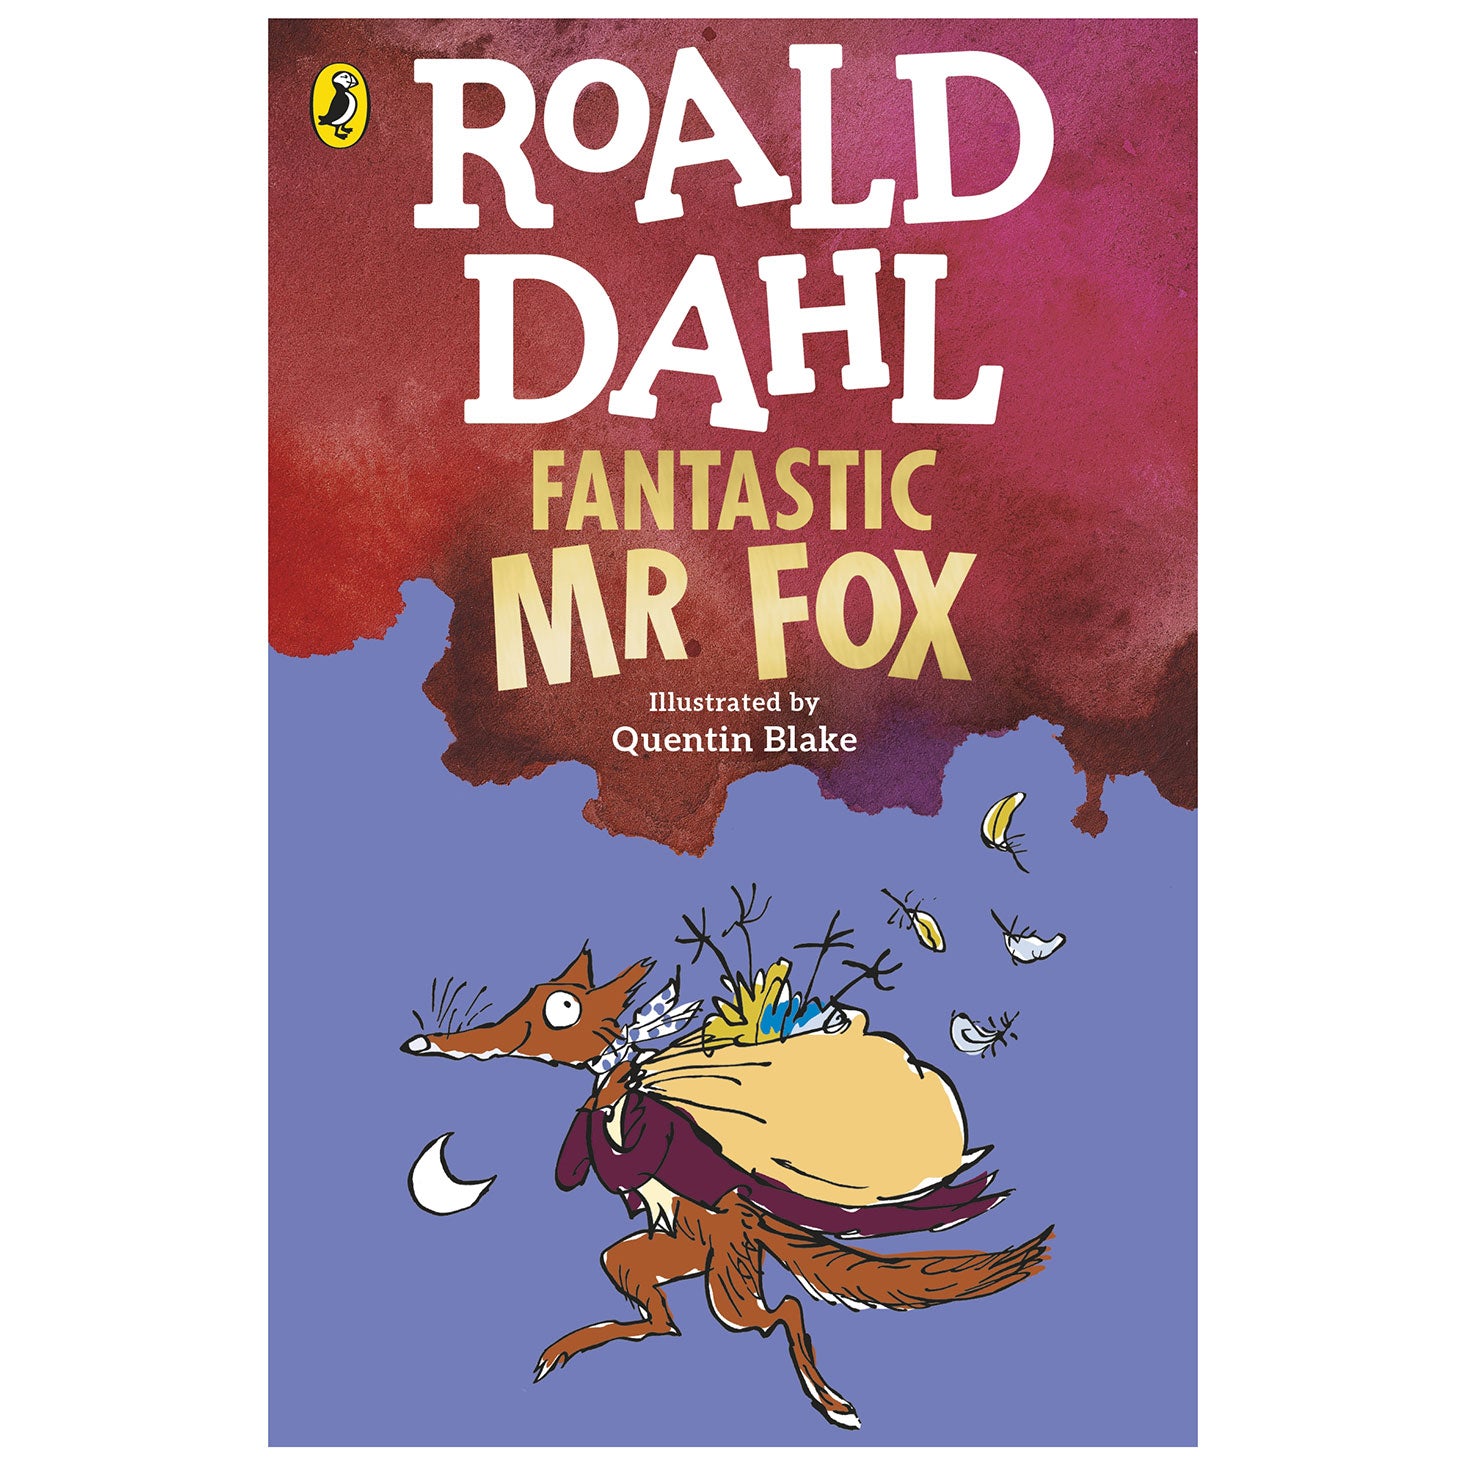 Fantastic Mr Fox by Roald Dahl with illustrations by Quentin Blake